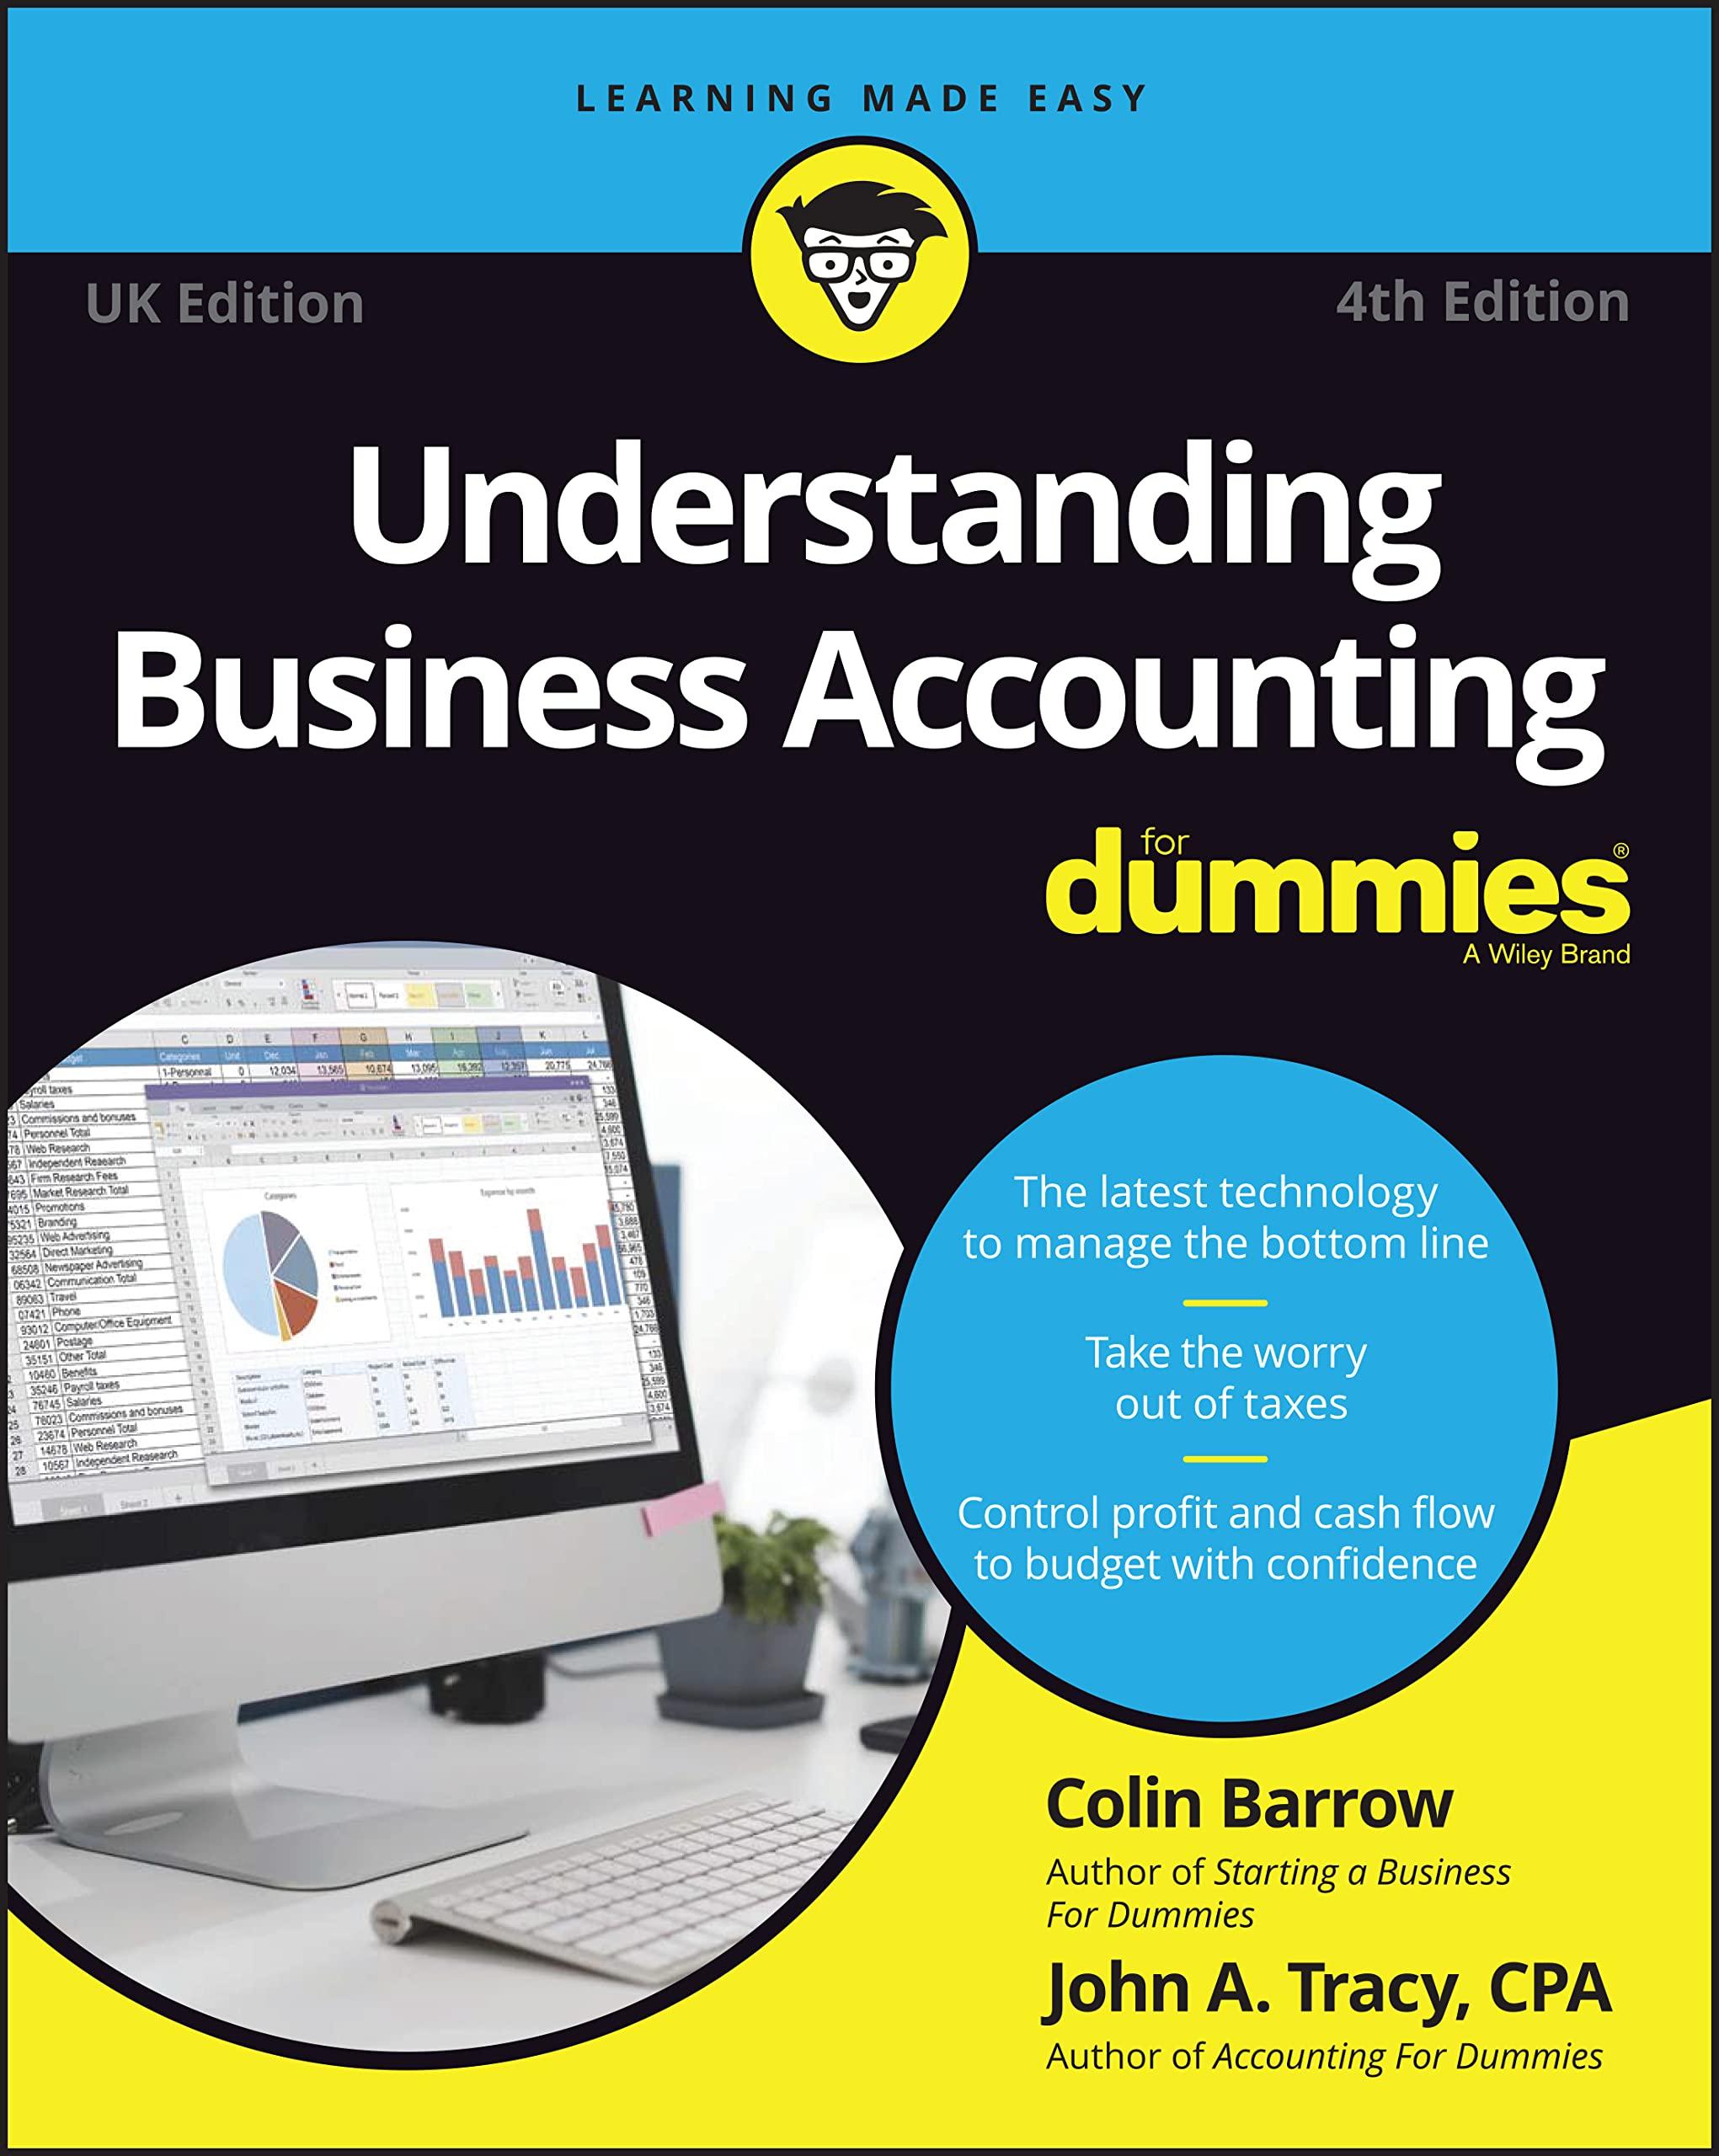 understanding business accounting for dummies 4th edition colin barrow, john a. tracy 1119413532,